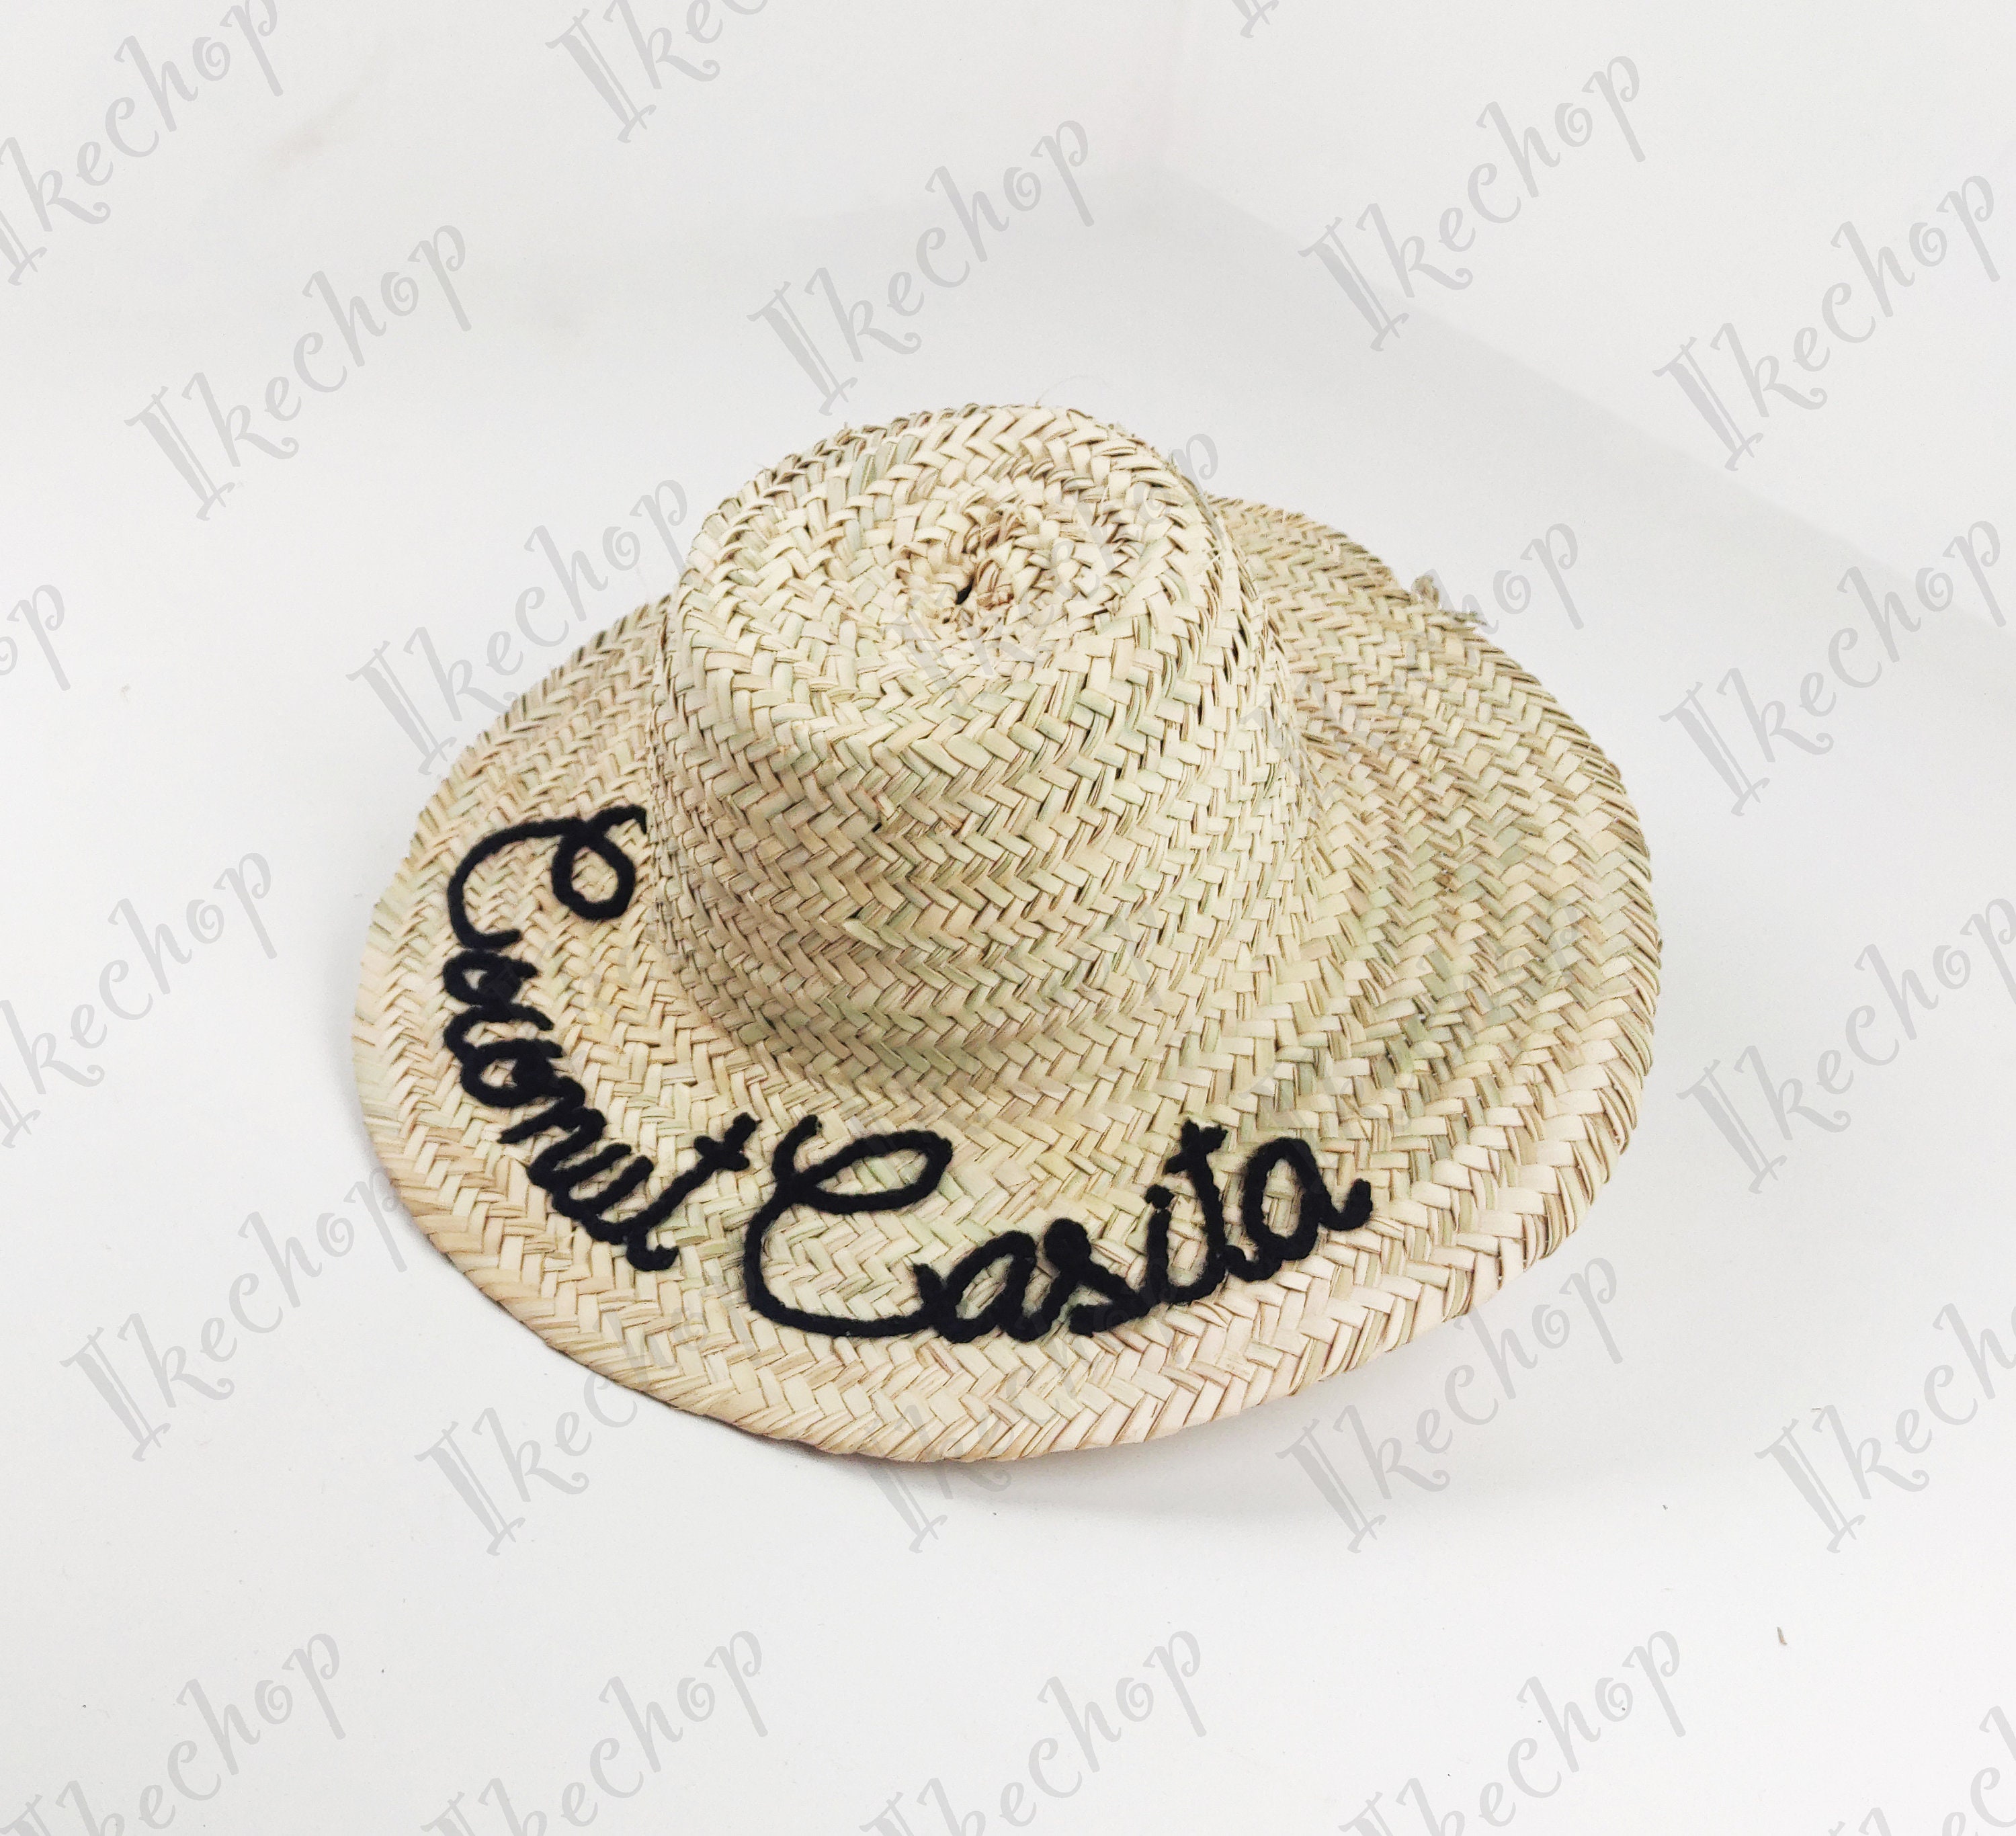 Gardening & Fishing Straw Hat, Brim Size 5.75 in. Inside Circumference About 23 in. Overall Hat Size Total Sun Coverage 19.5 x 17.5 in.